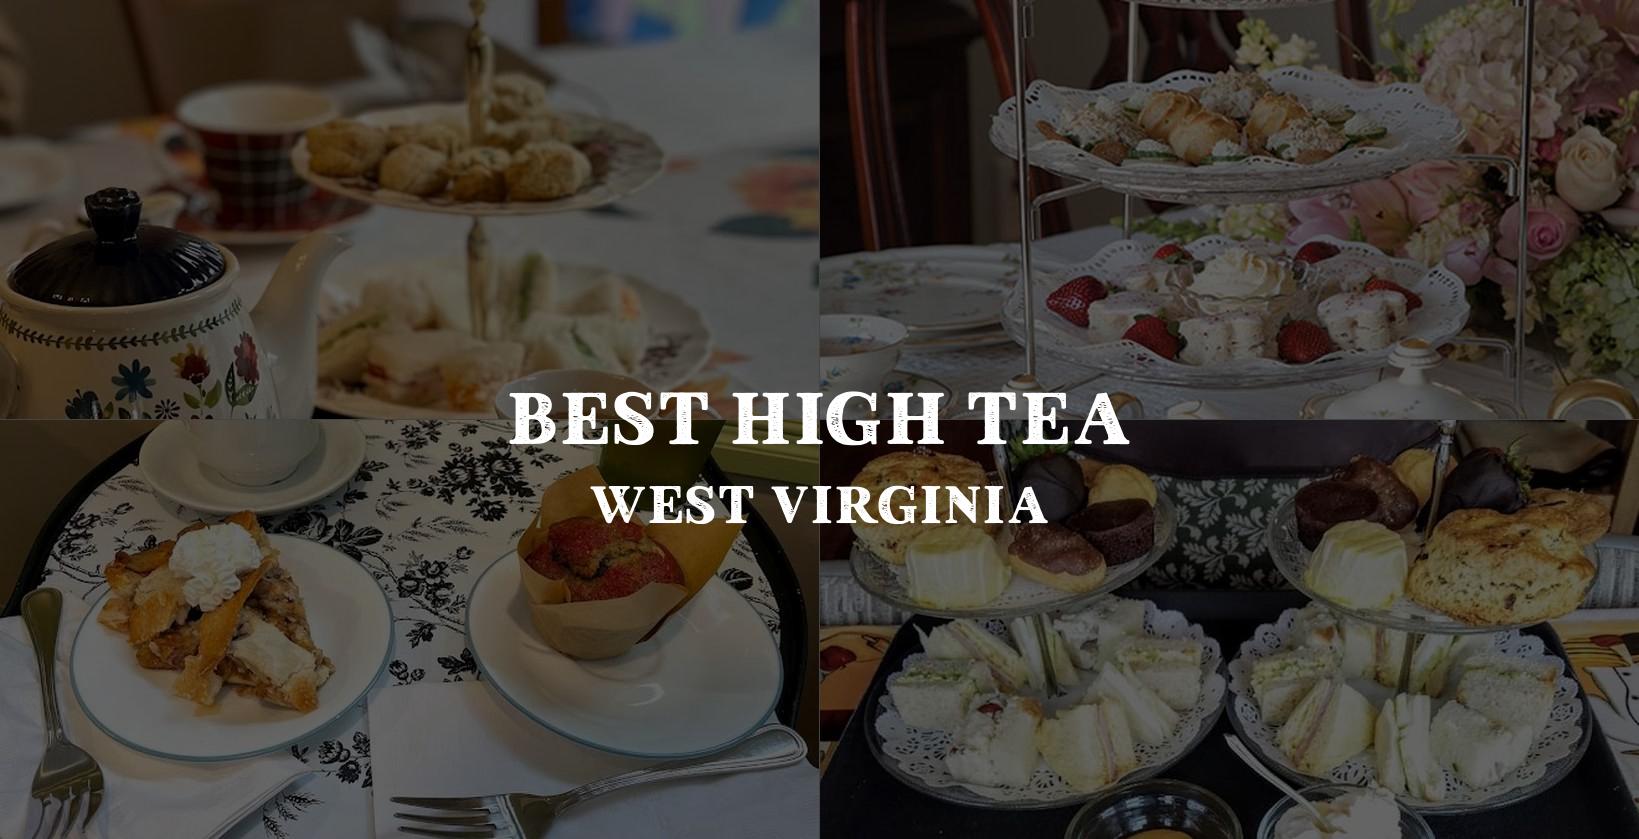 Choosing the perfect spot for High Tea in West Virginia